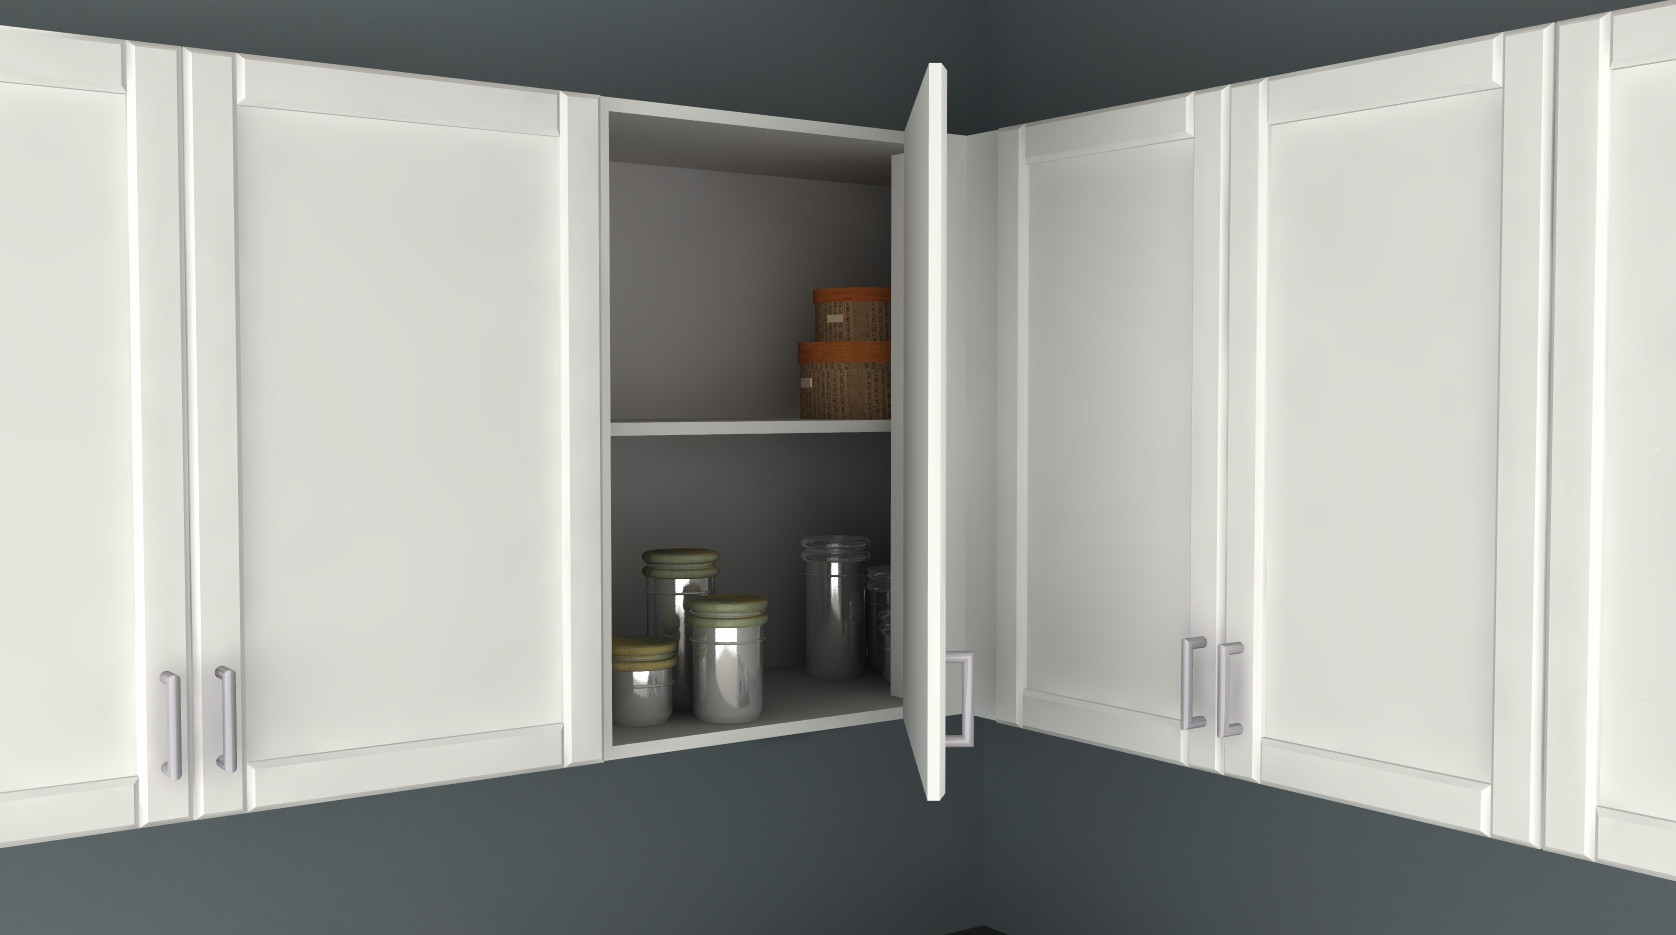 Kitchen Cabinet Walls
 IKEA Kitchen Hack A Blind Corner Wall Cabinet Perfect for